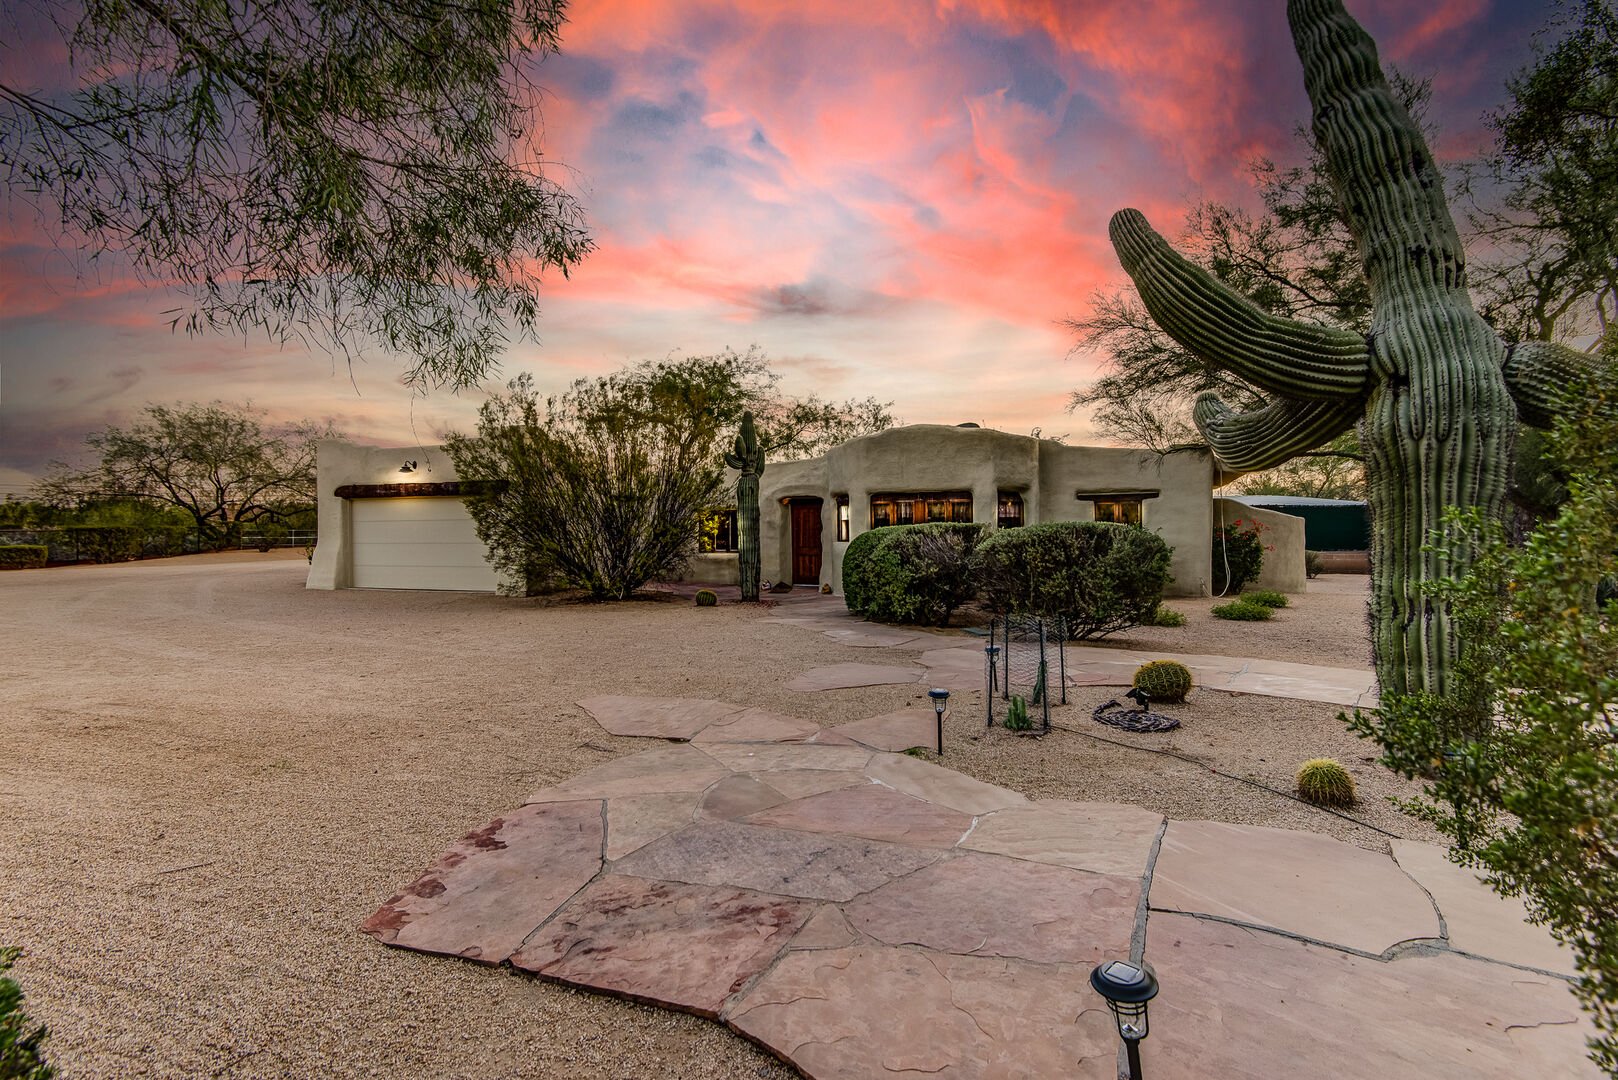 Vacation Rentals in Scottsdale with a Desert View